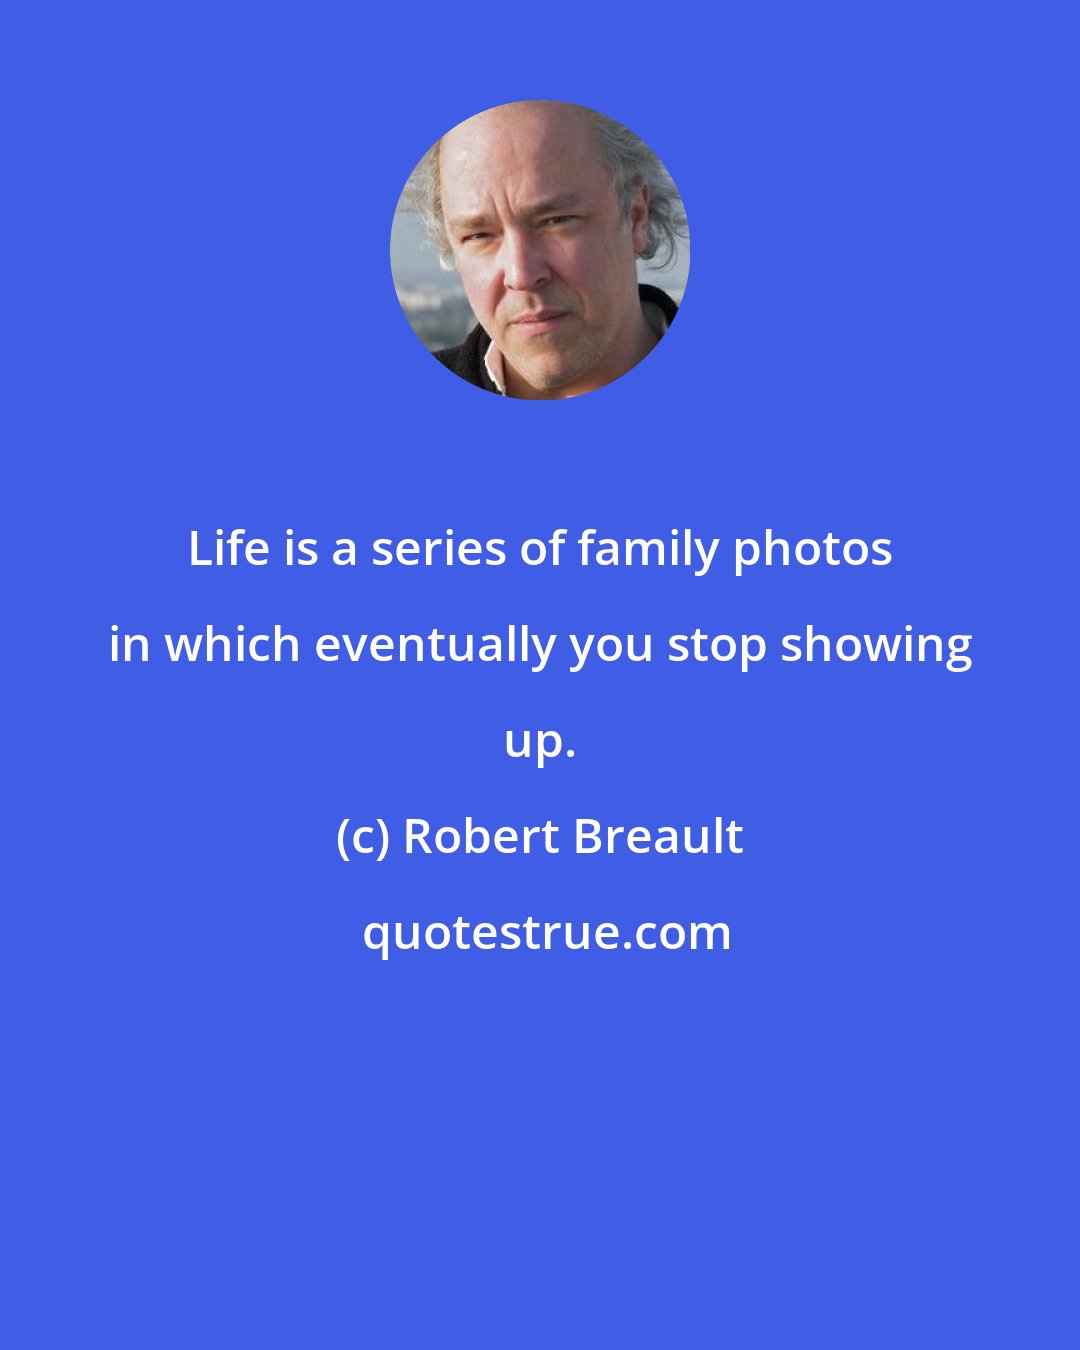 Robert Breault: Life is a series of family photos in which eventually you stop showing up.